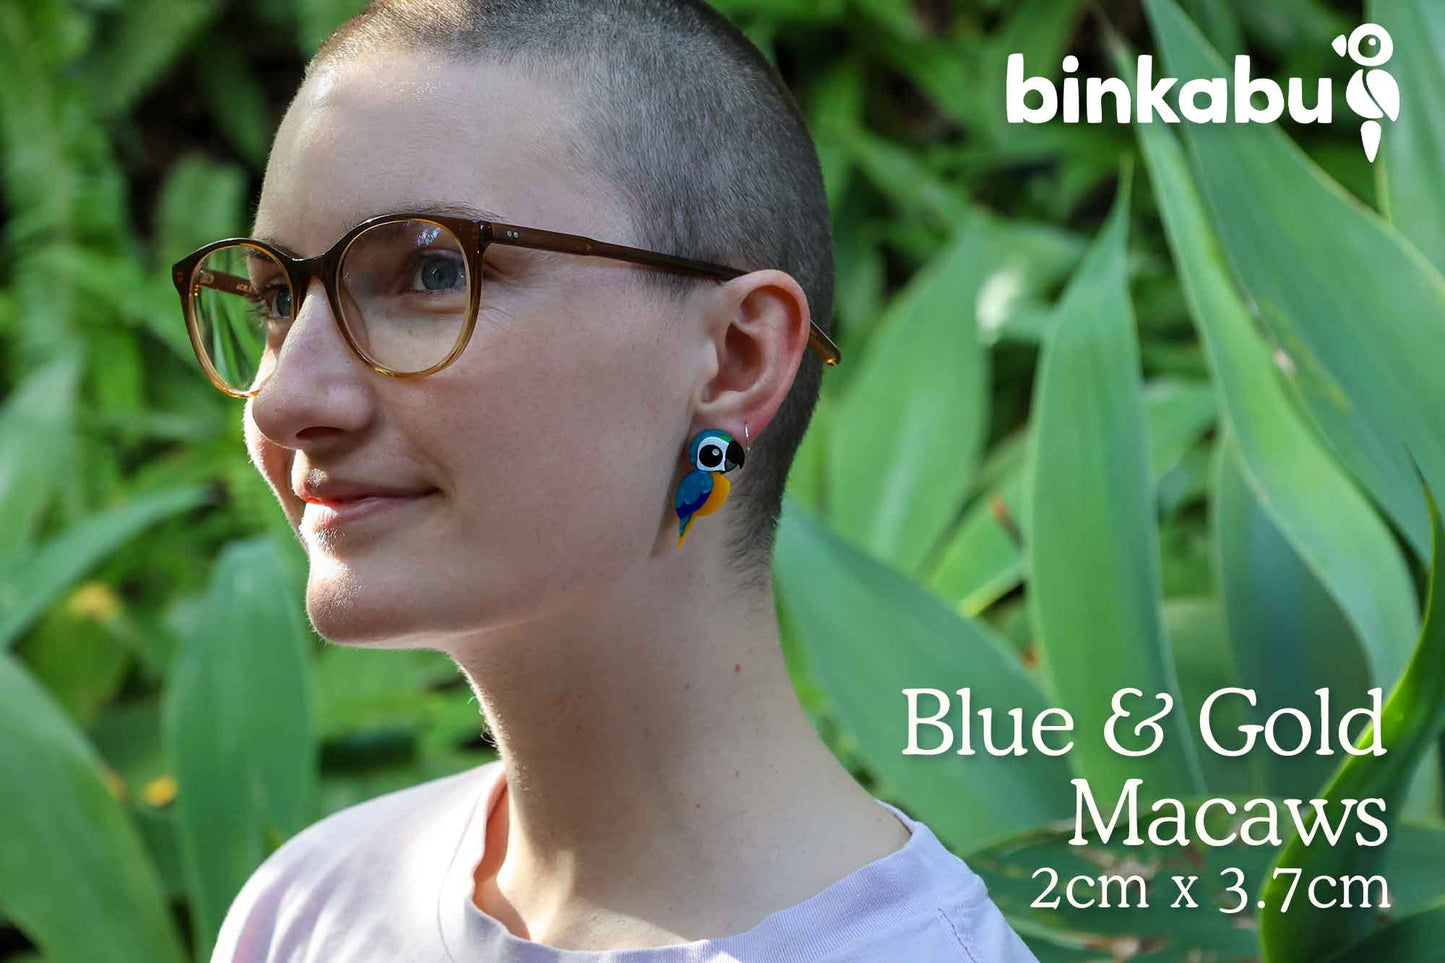 Blue and Gold Macaw Studs - Statement Bird Earrings